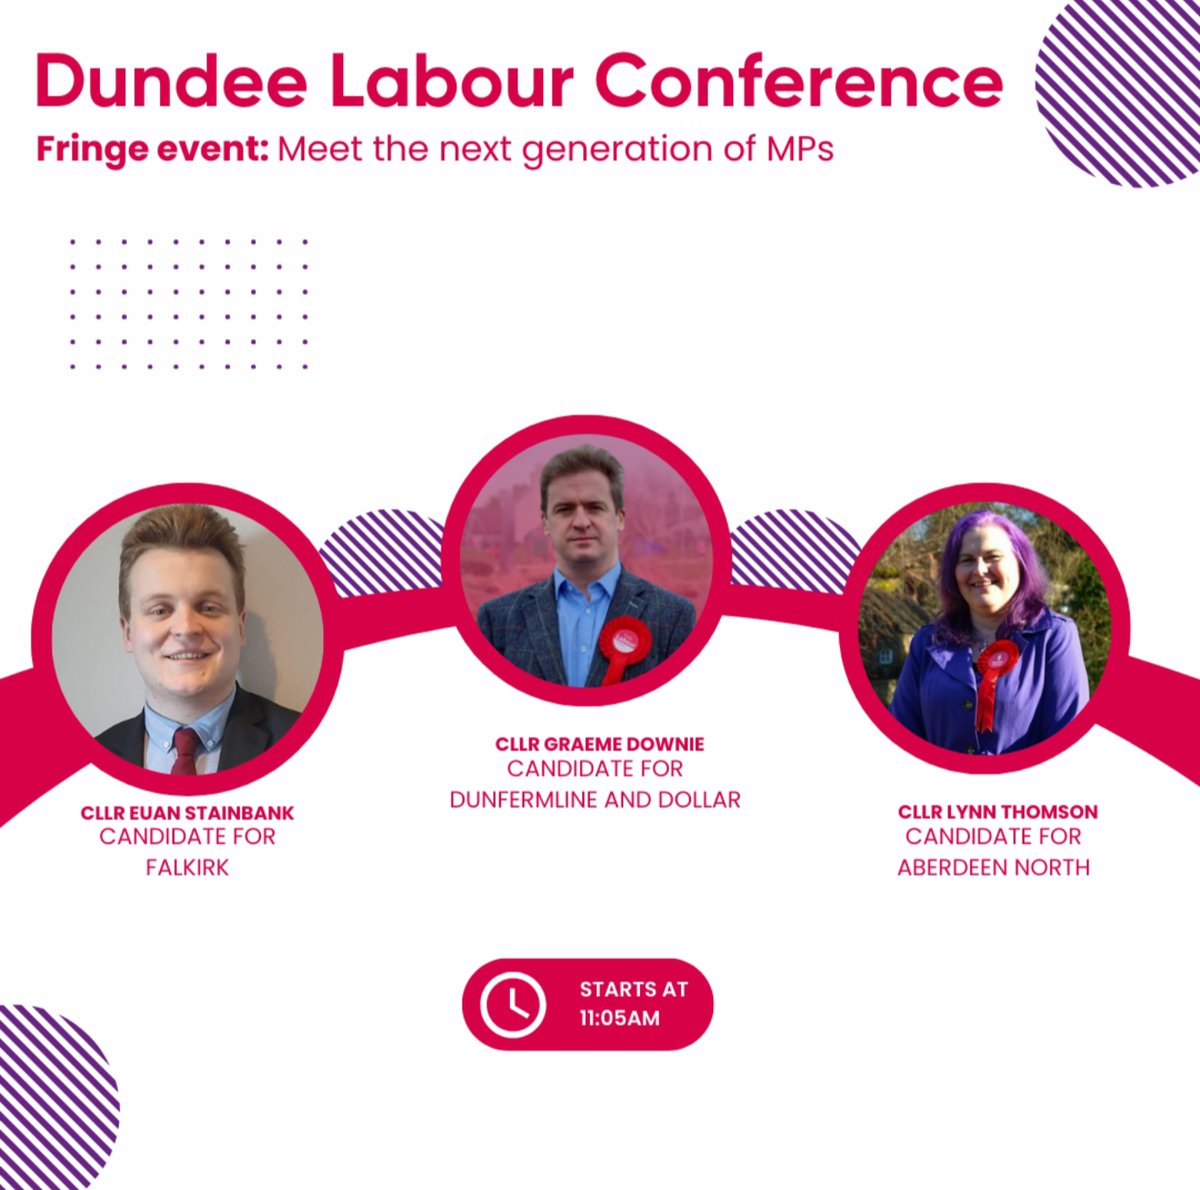 We are pleased to announce one of the fringe events at the Dundee Labour Conference. As we all know, a general election could be called at any minute.